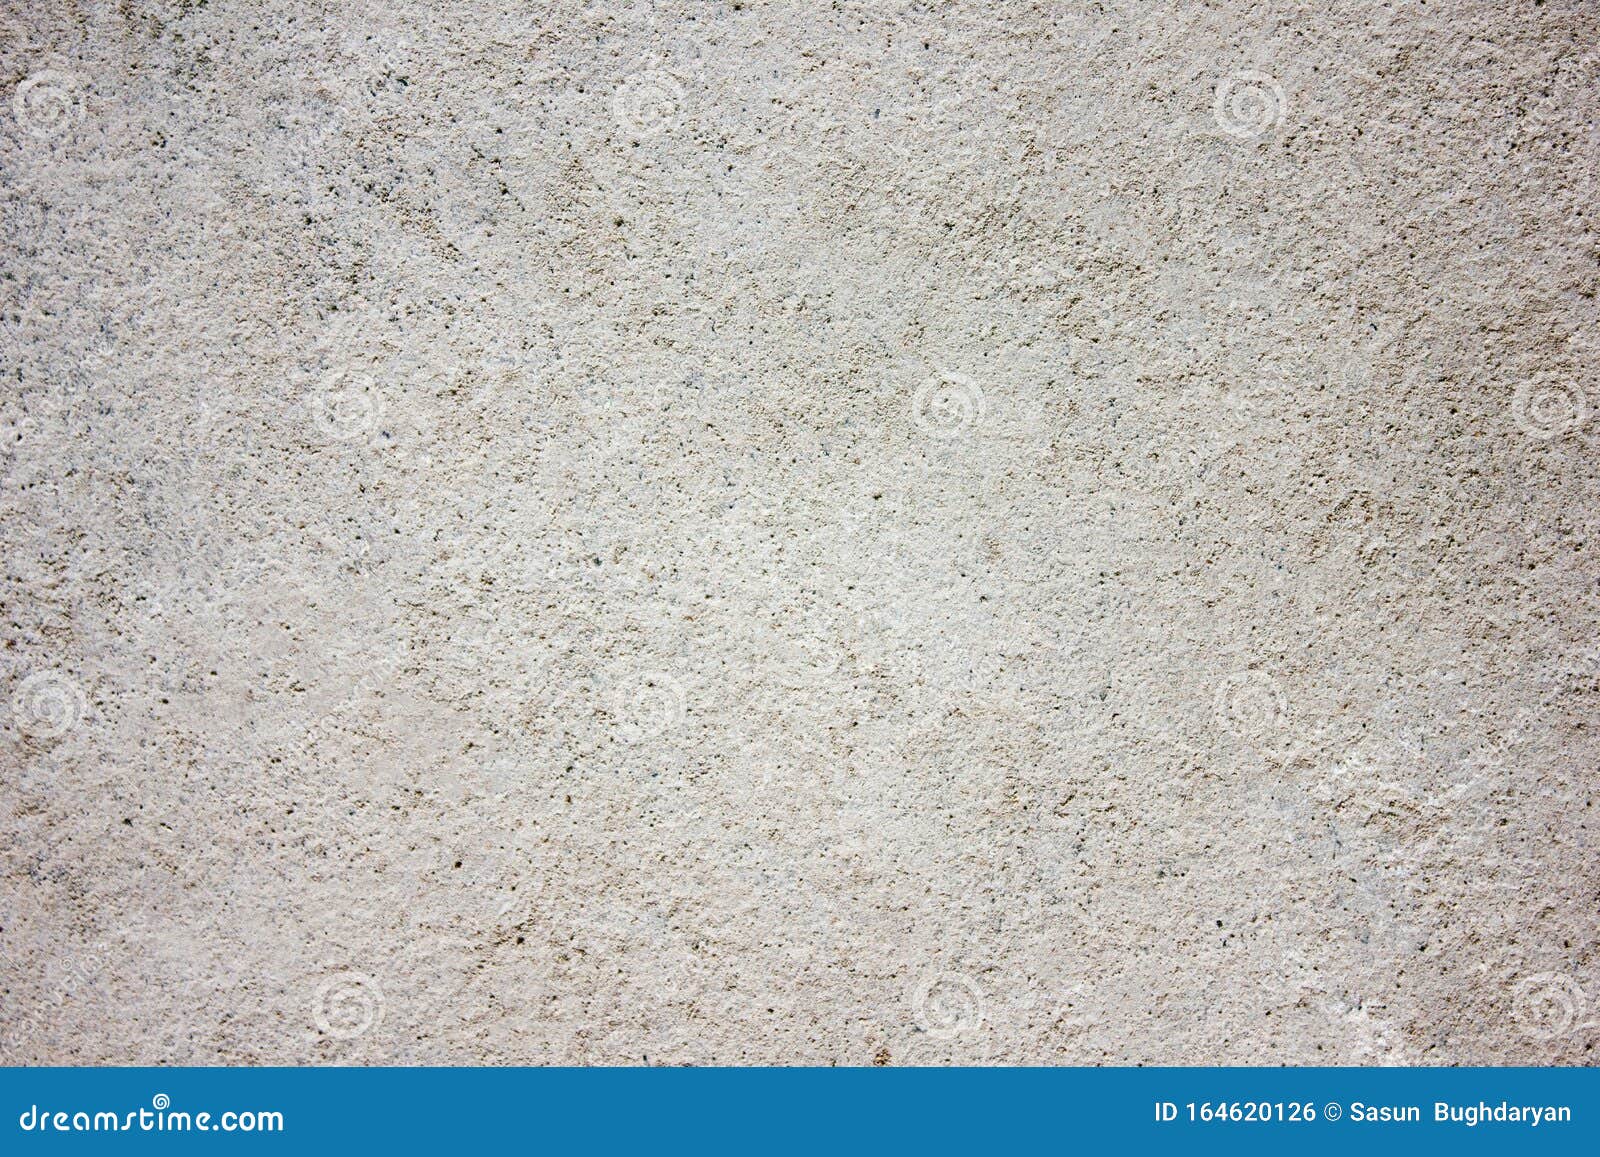 Wall in Black and White Textures Stock Photo - Image of stone, concrete ...